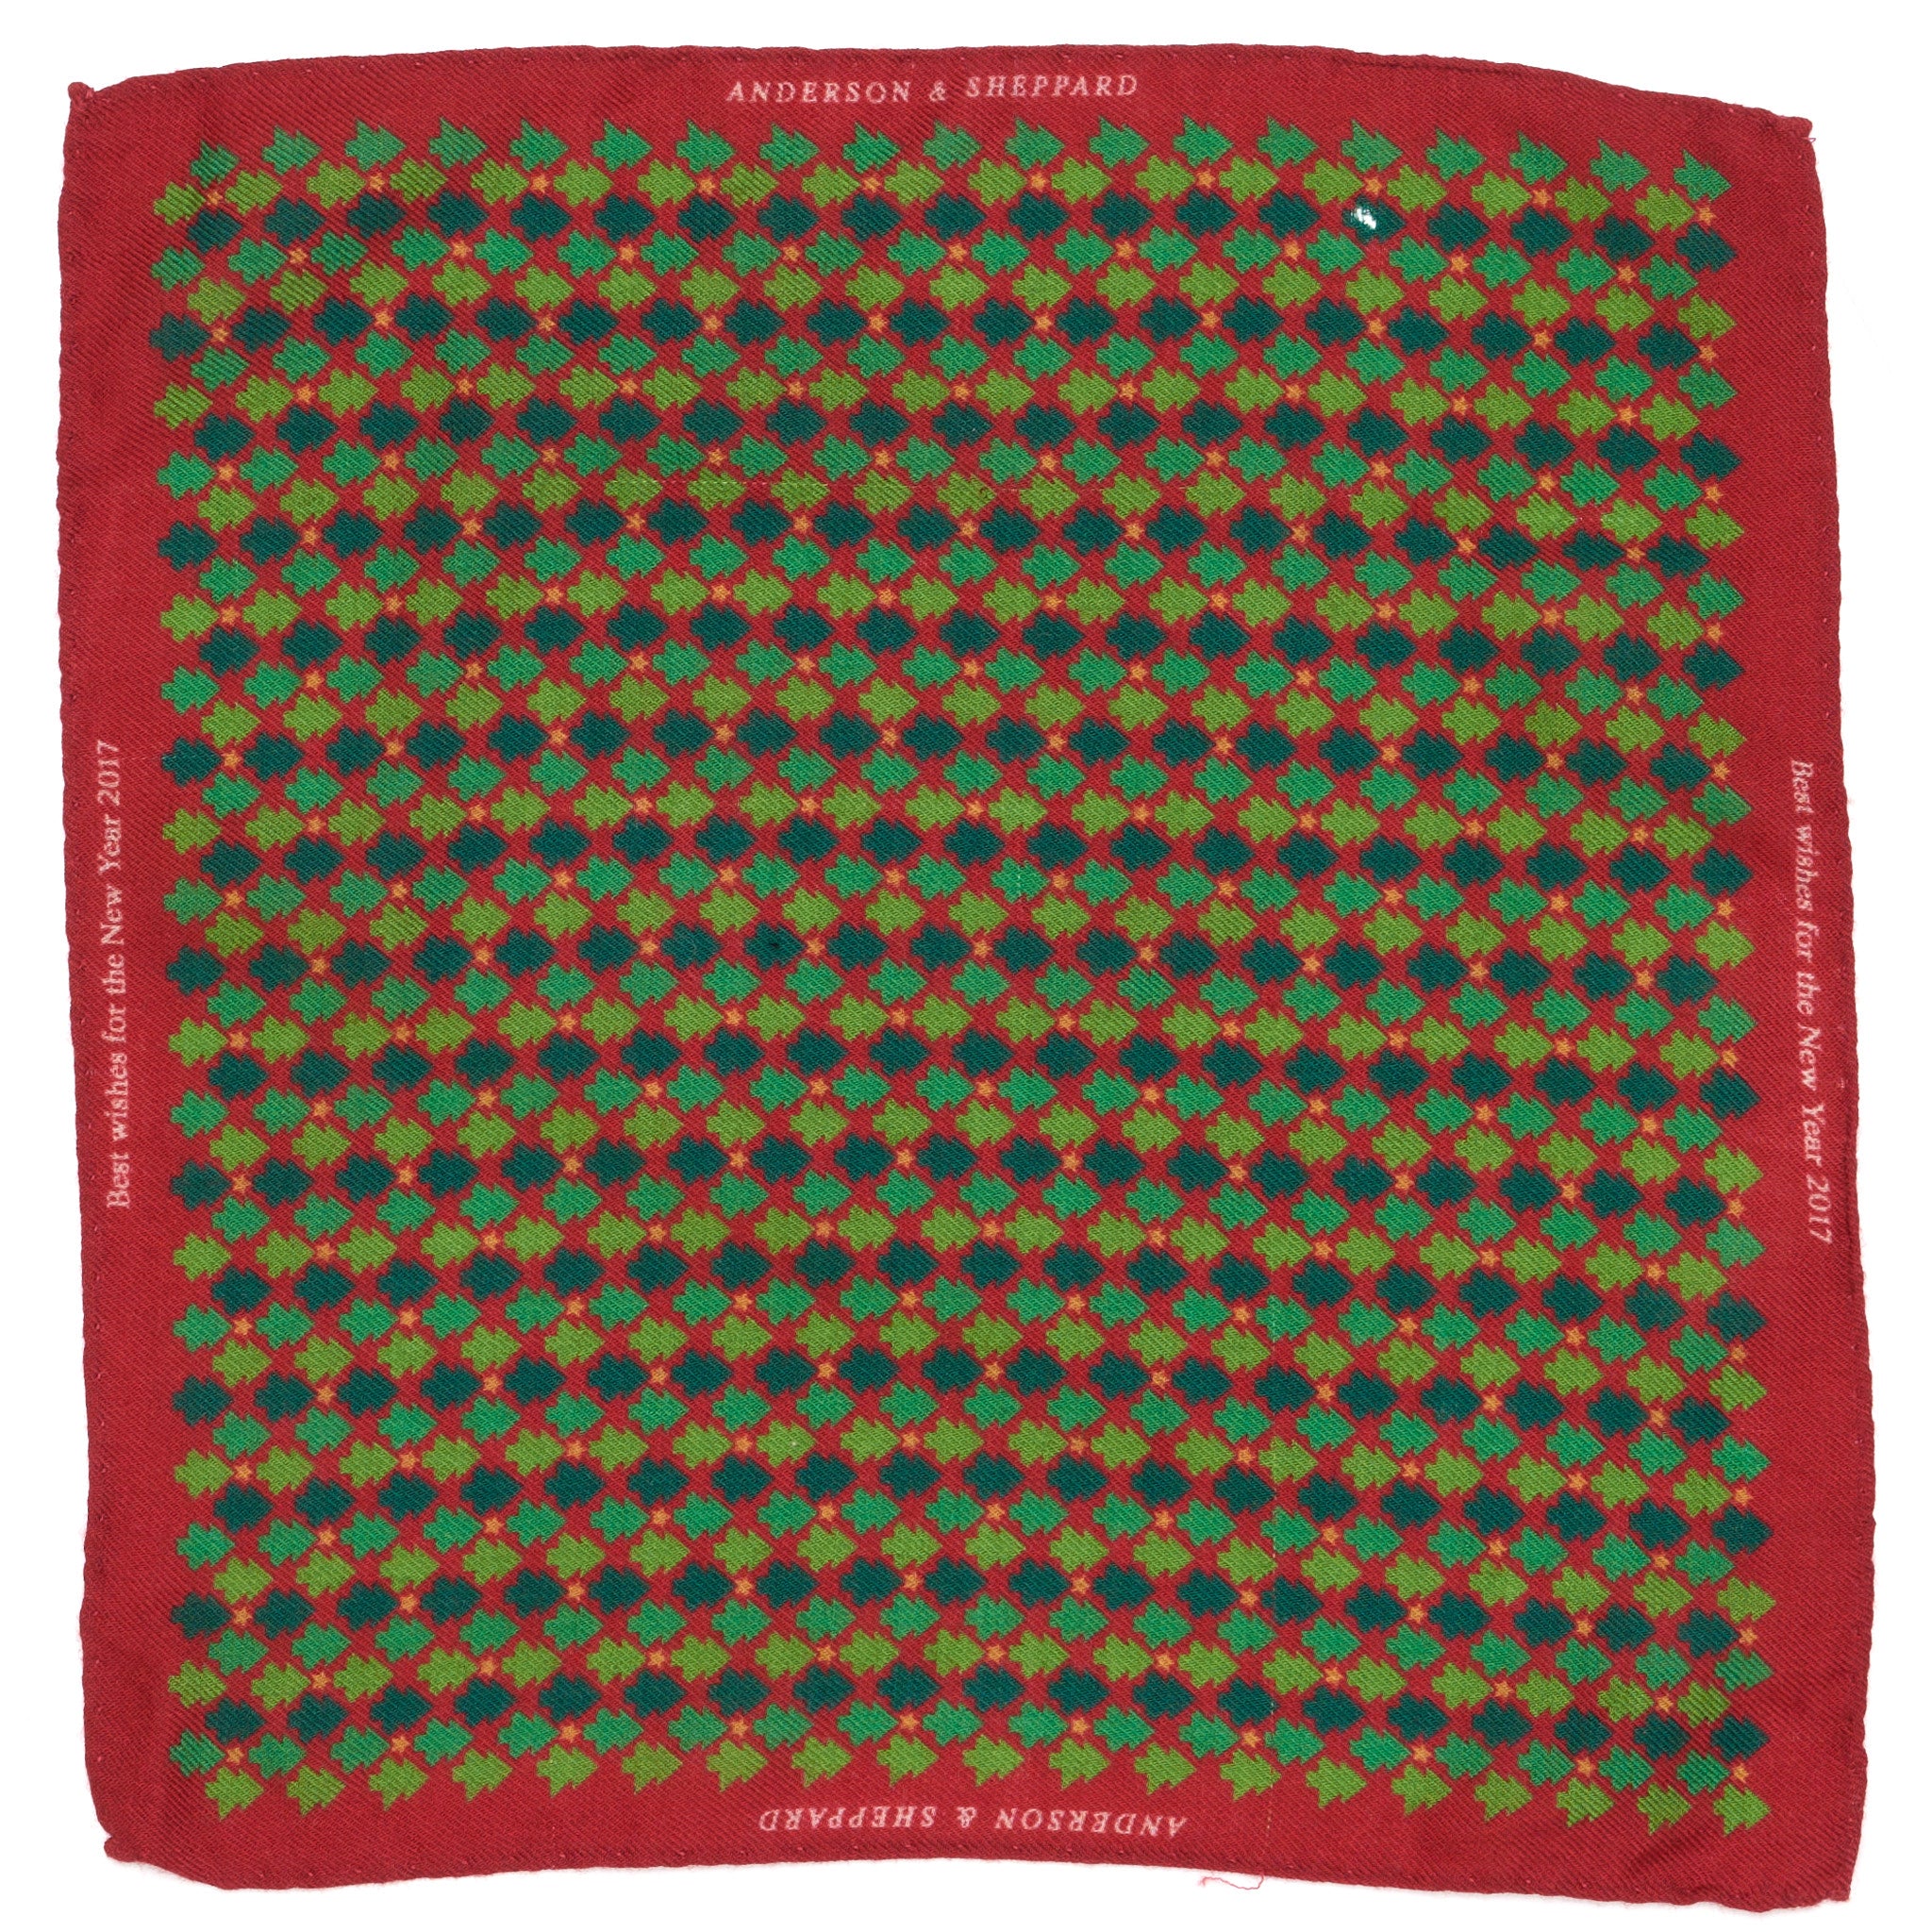 ANDERSON & SHEPPARD "NEW YEAR 2017" Red Pine Star Cotton Pocket Square